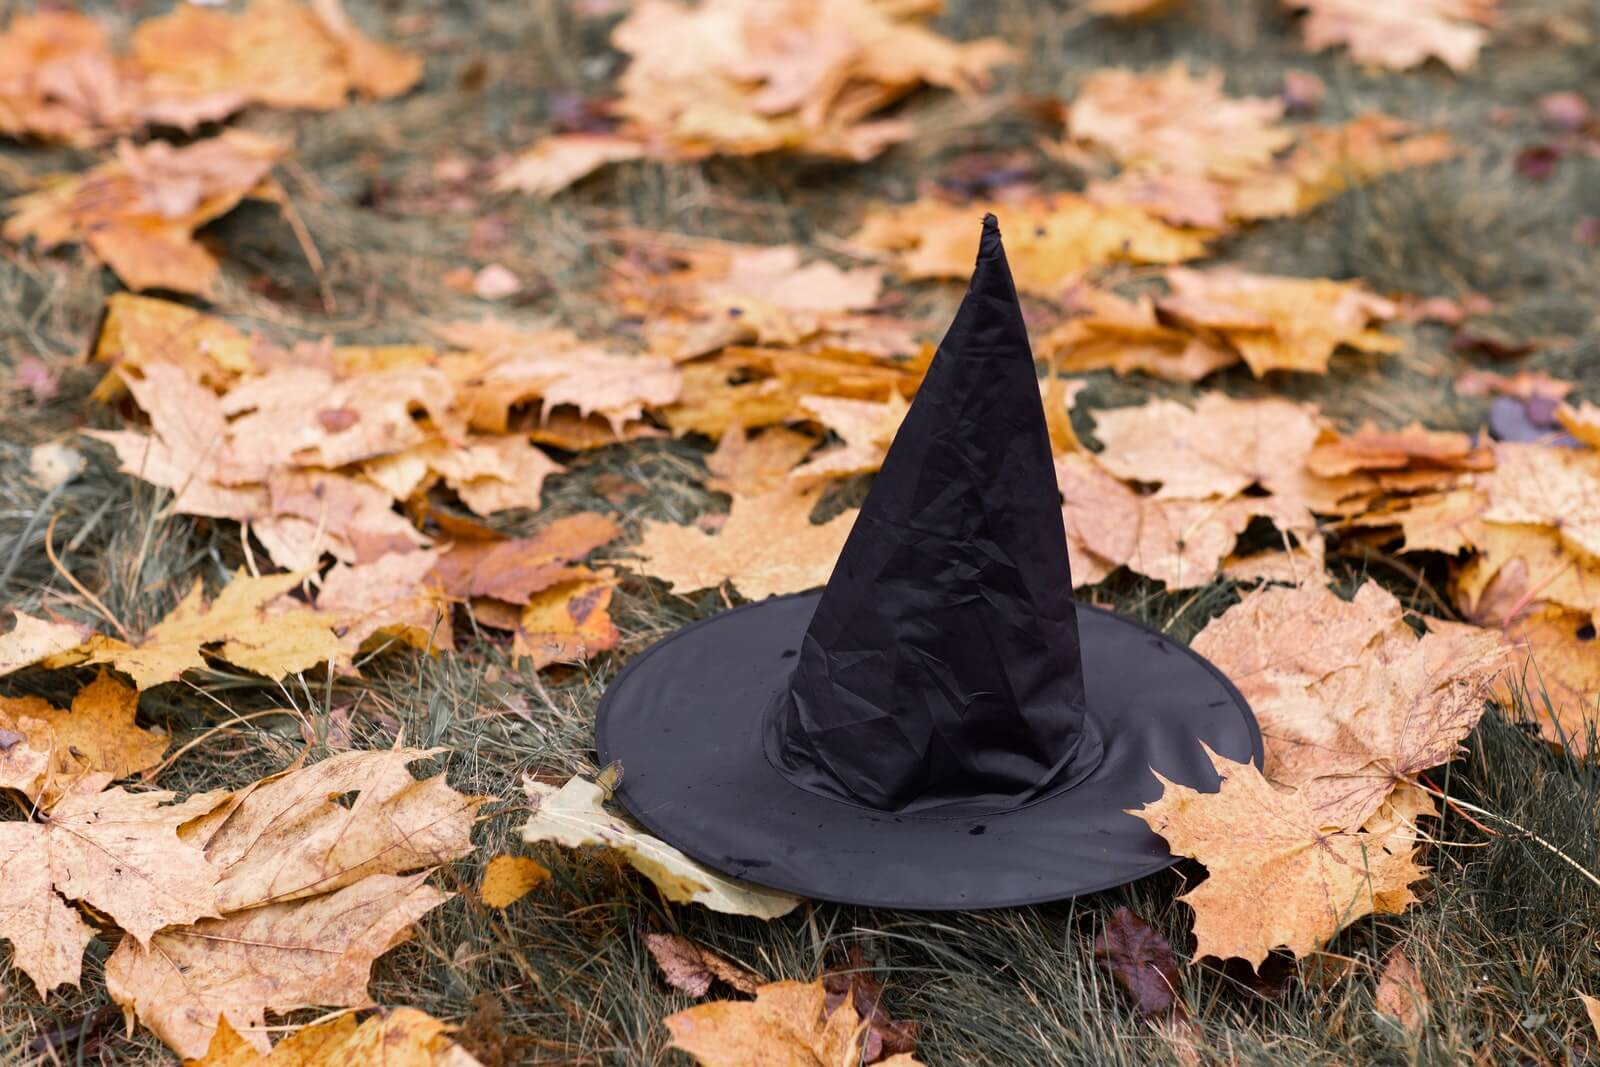 A black witch's hat sits upright among fallen leaves on halloween.